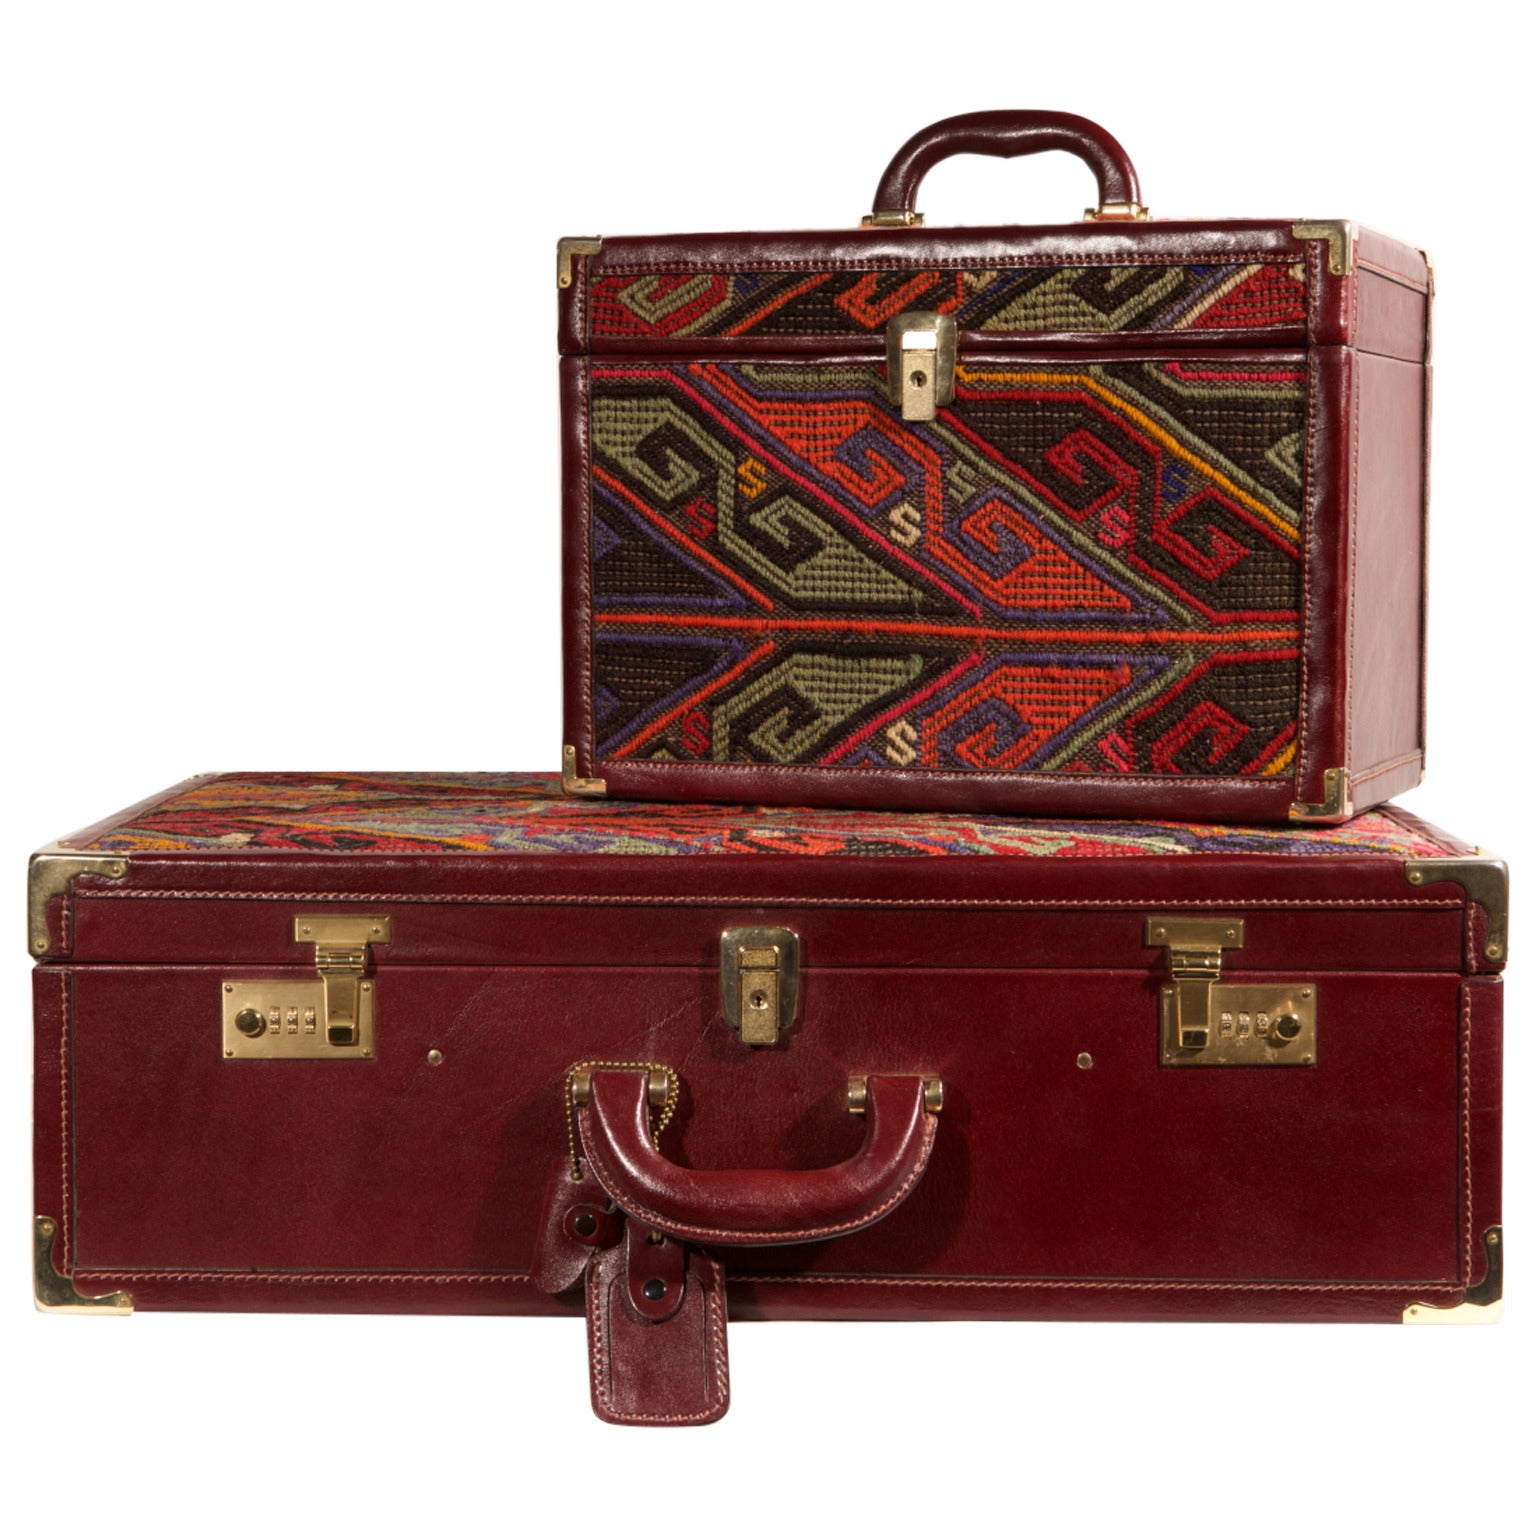 SET Suitcase and Beauty Case with Kilim and Leather, Vuitton Model For Sale